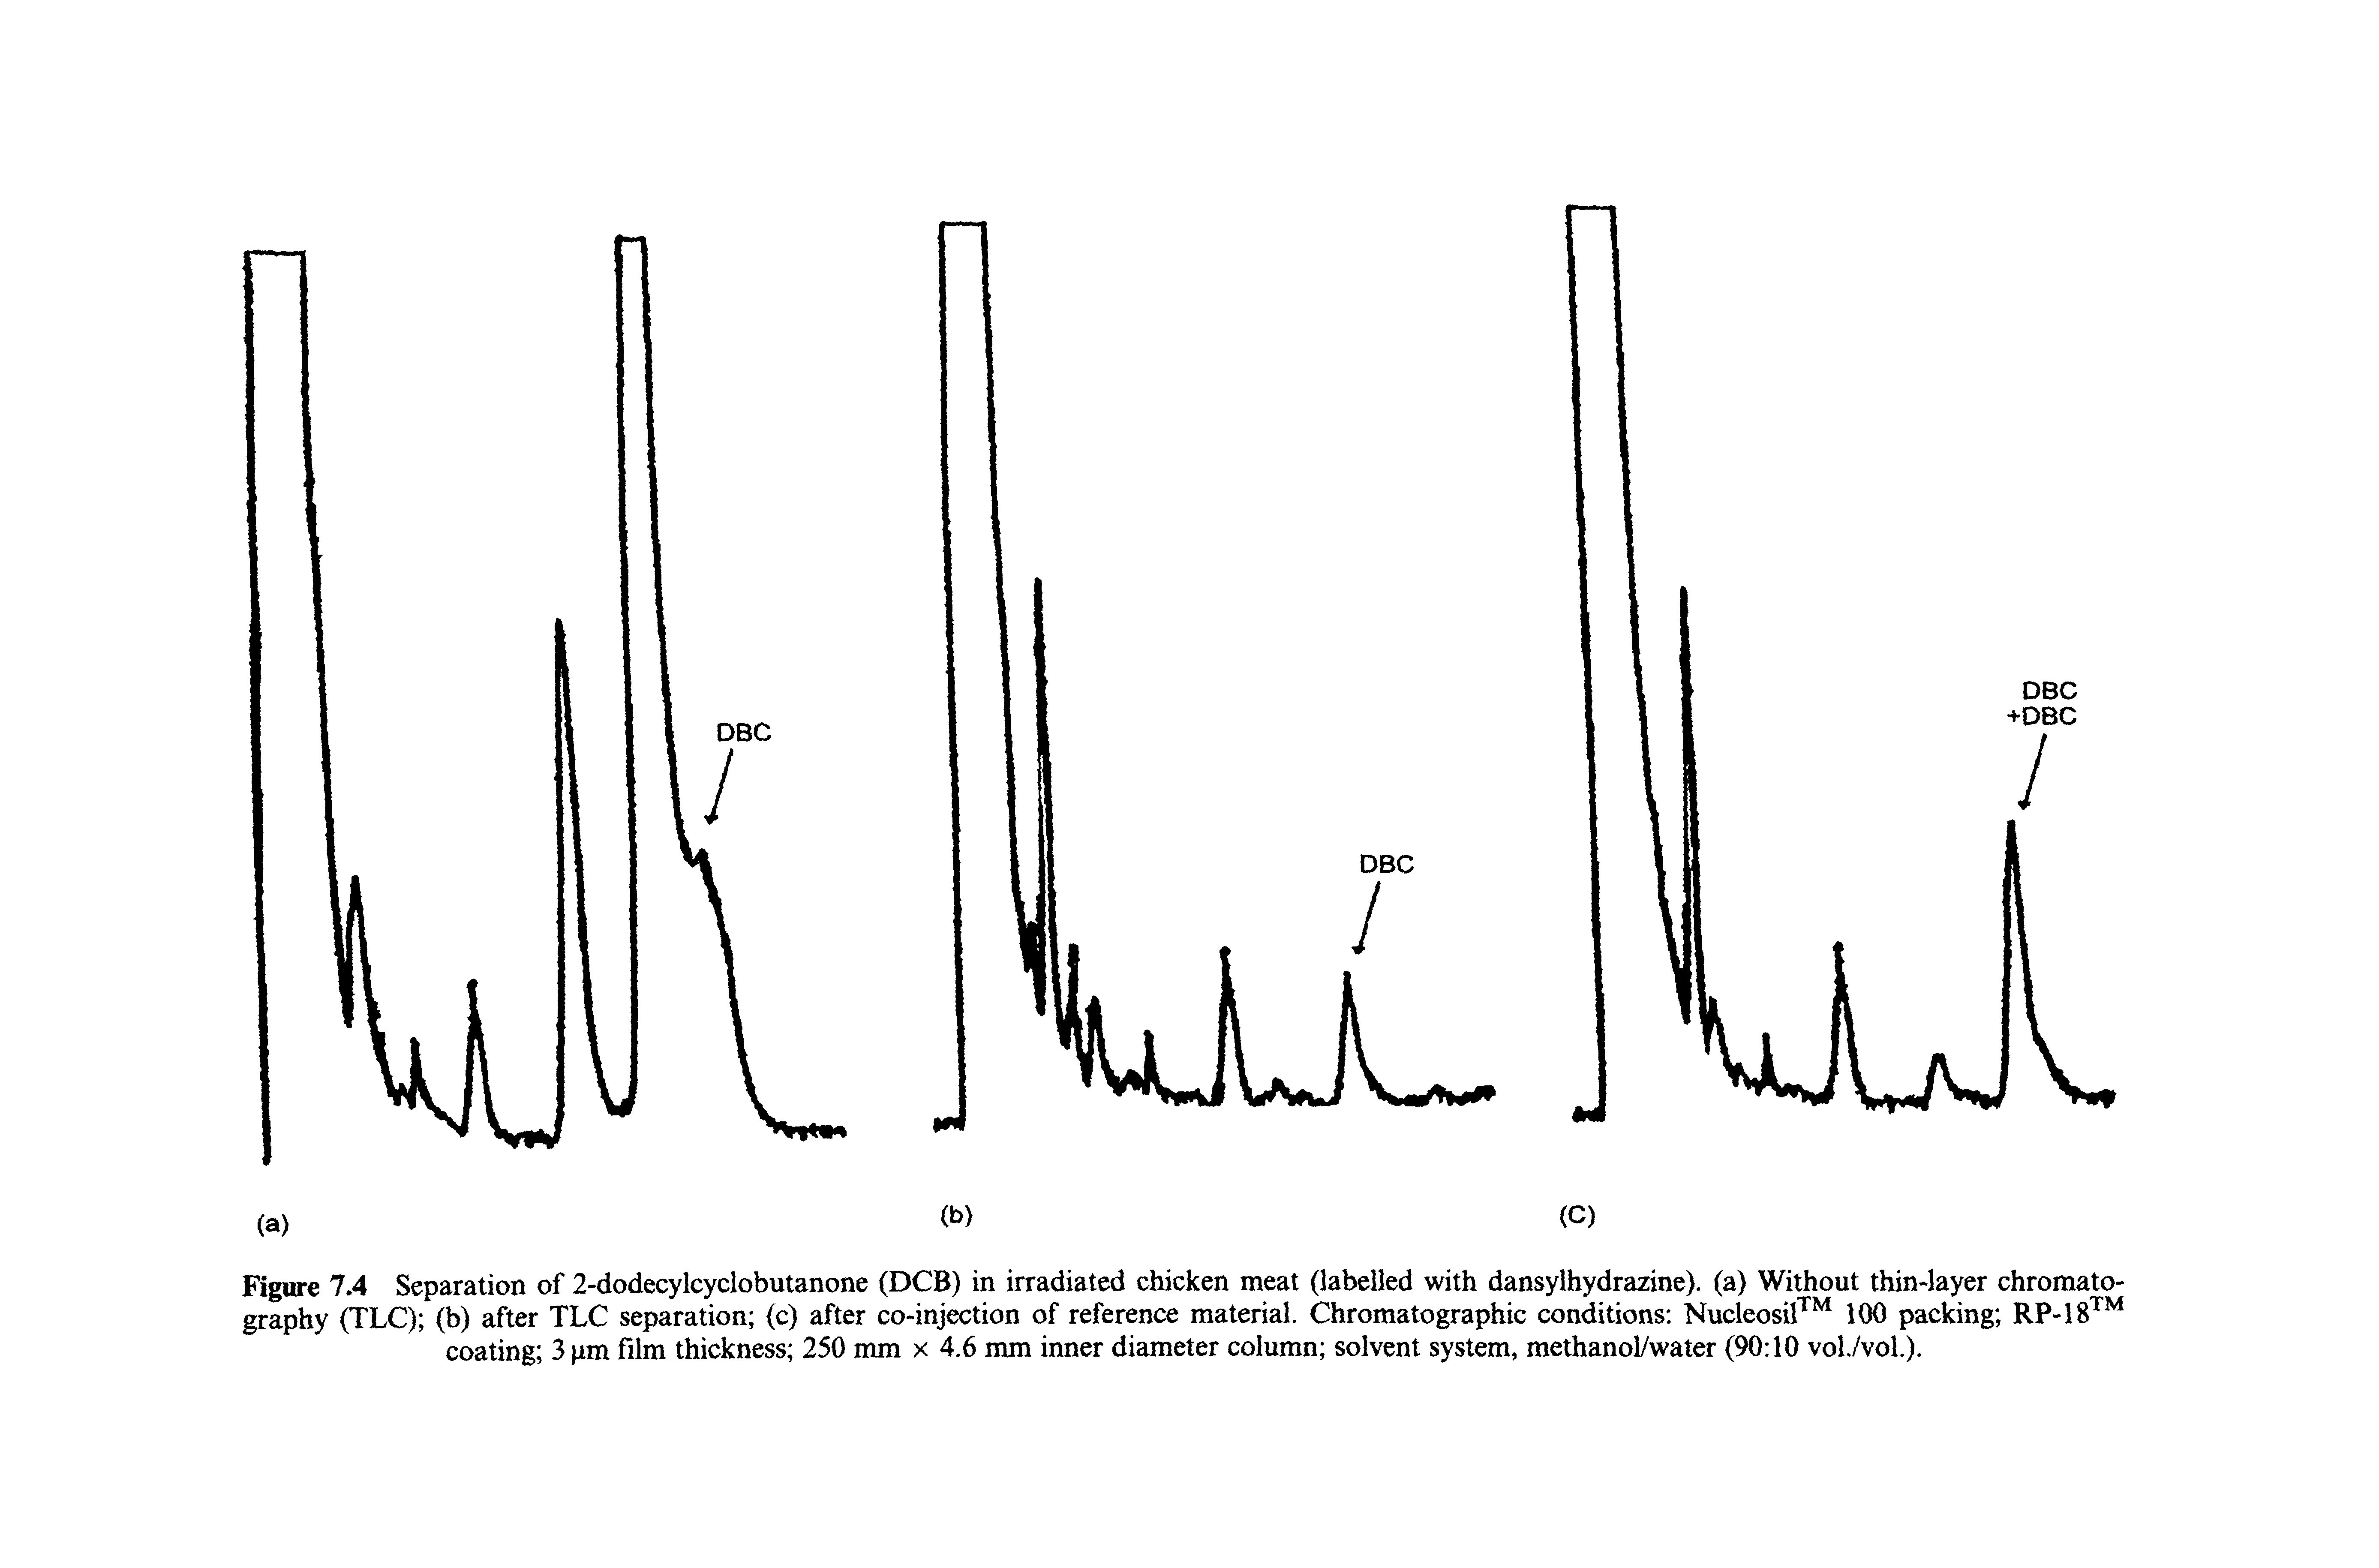 Figure 7.4 Separation of 2-dodecylcyclobutanone (DCS) in irradiated chicken meat (labelled with dansylhydrazine). (a) Without thindayer chromatography (TLC) (b) after TLC separation (c) after co-injection of reference material. Chromatographic conditions NucleosiF 100 packing RP-18 coating 3 pm film thickness 250 mm x 4.6 mm inner diameter column solvent system, methanol/water (90 10 vol./vol).